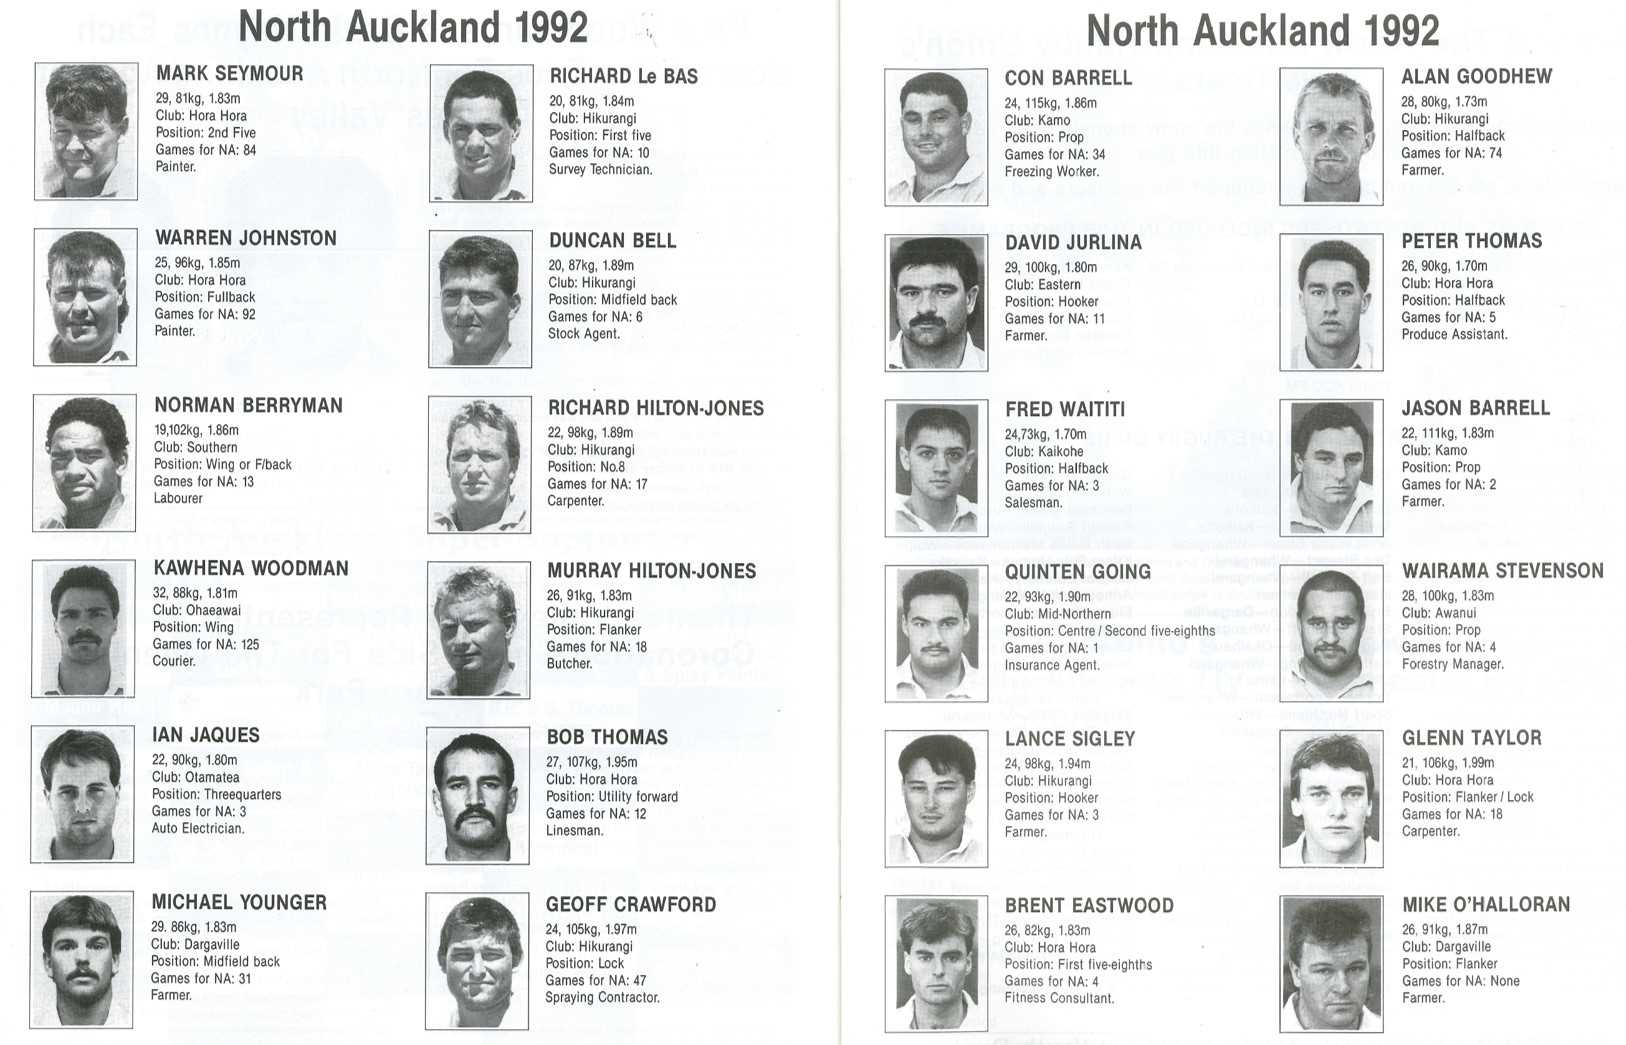 blast-from-the-past-north-auckland-team-of-1992